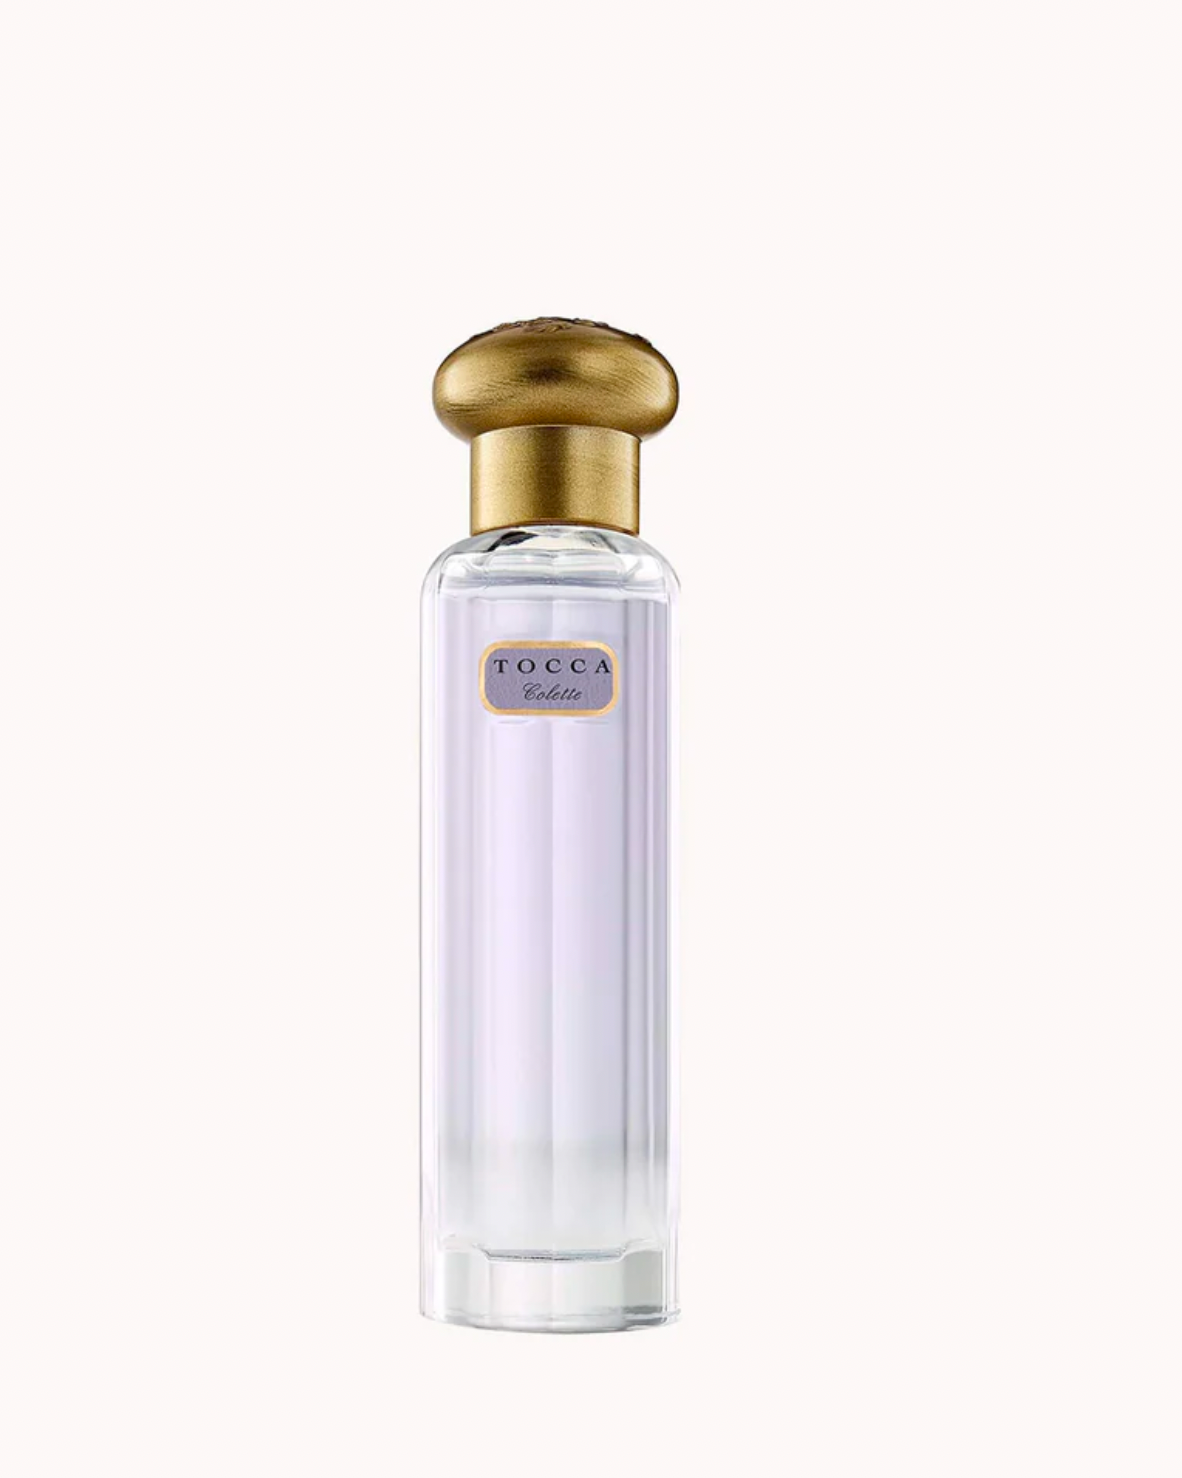 Image of Tocca Colette Travel spray on a white background